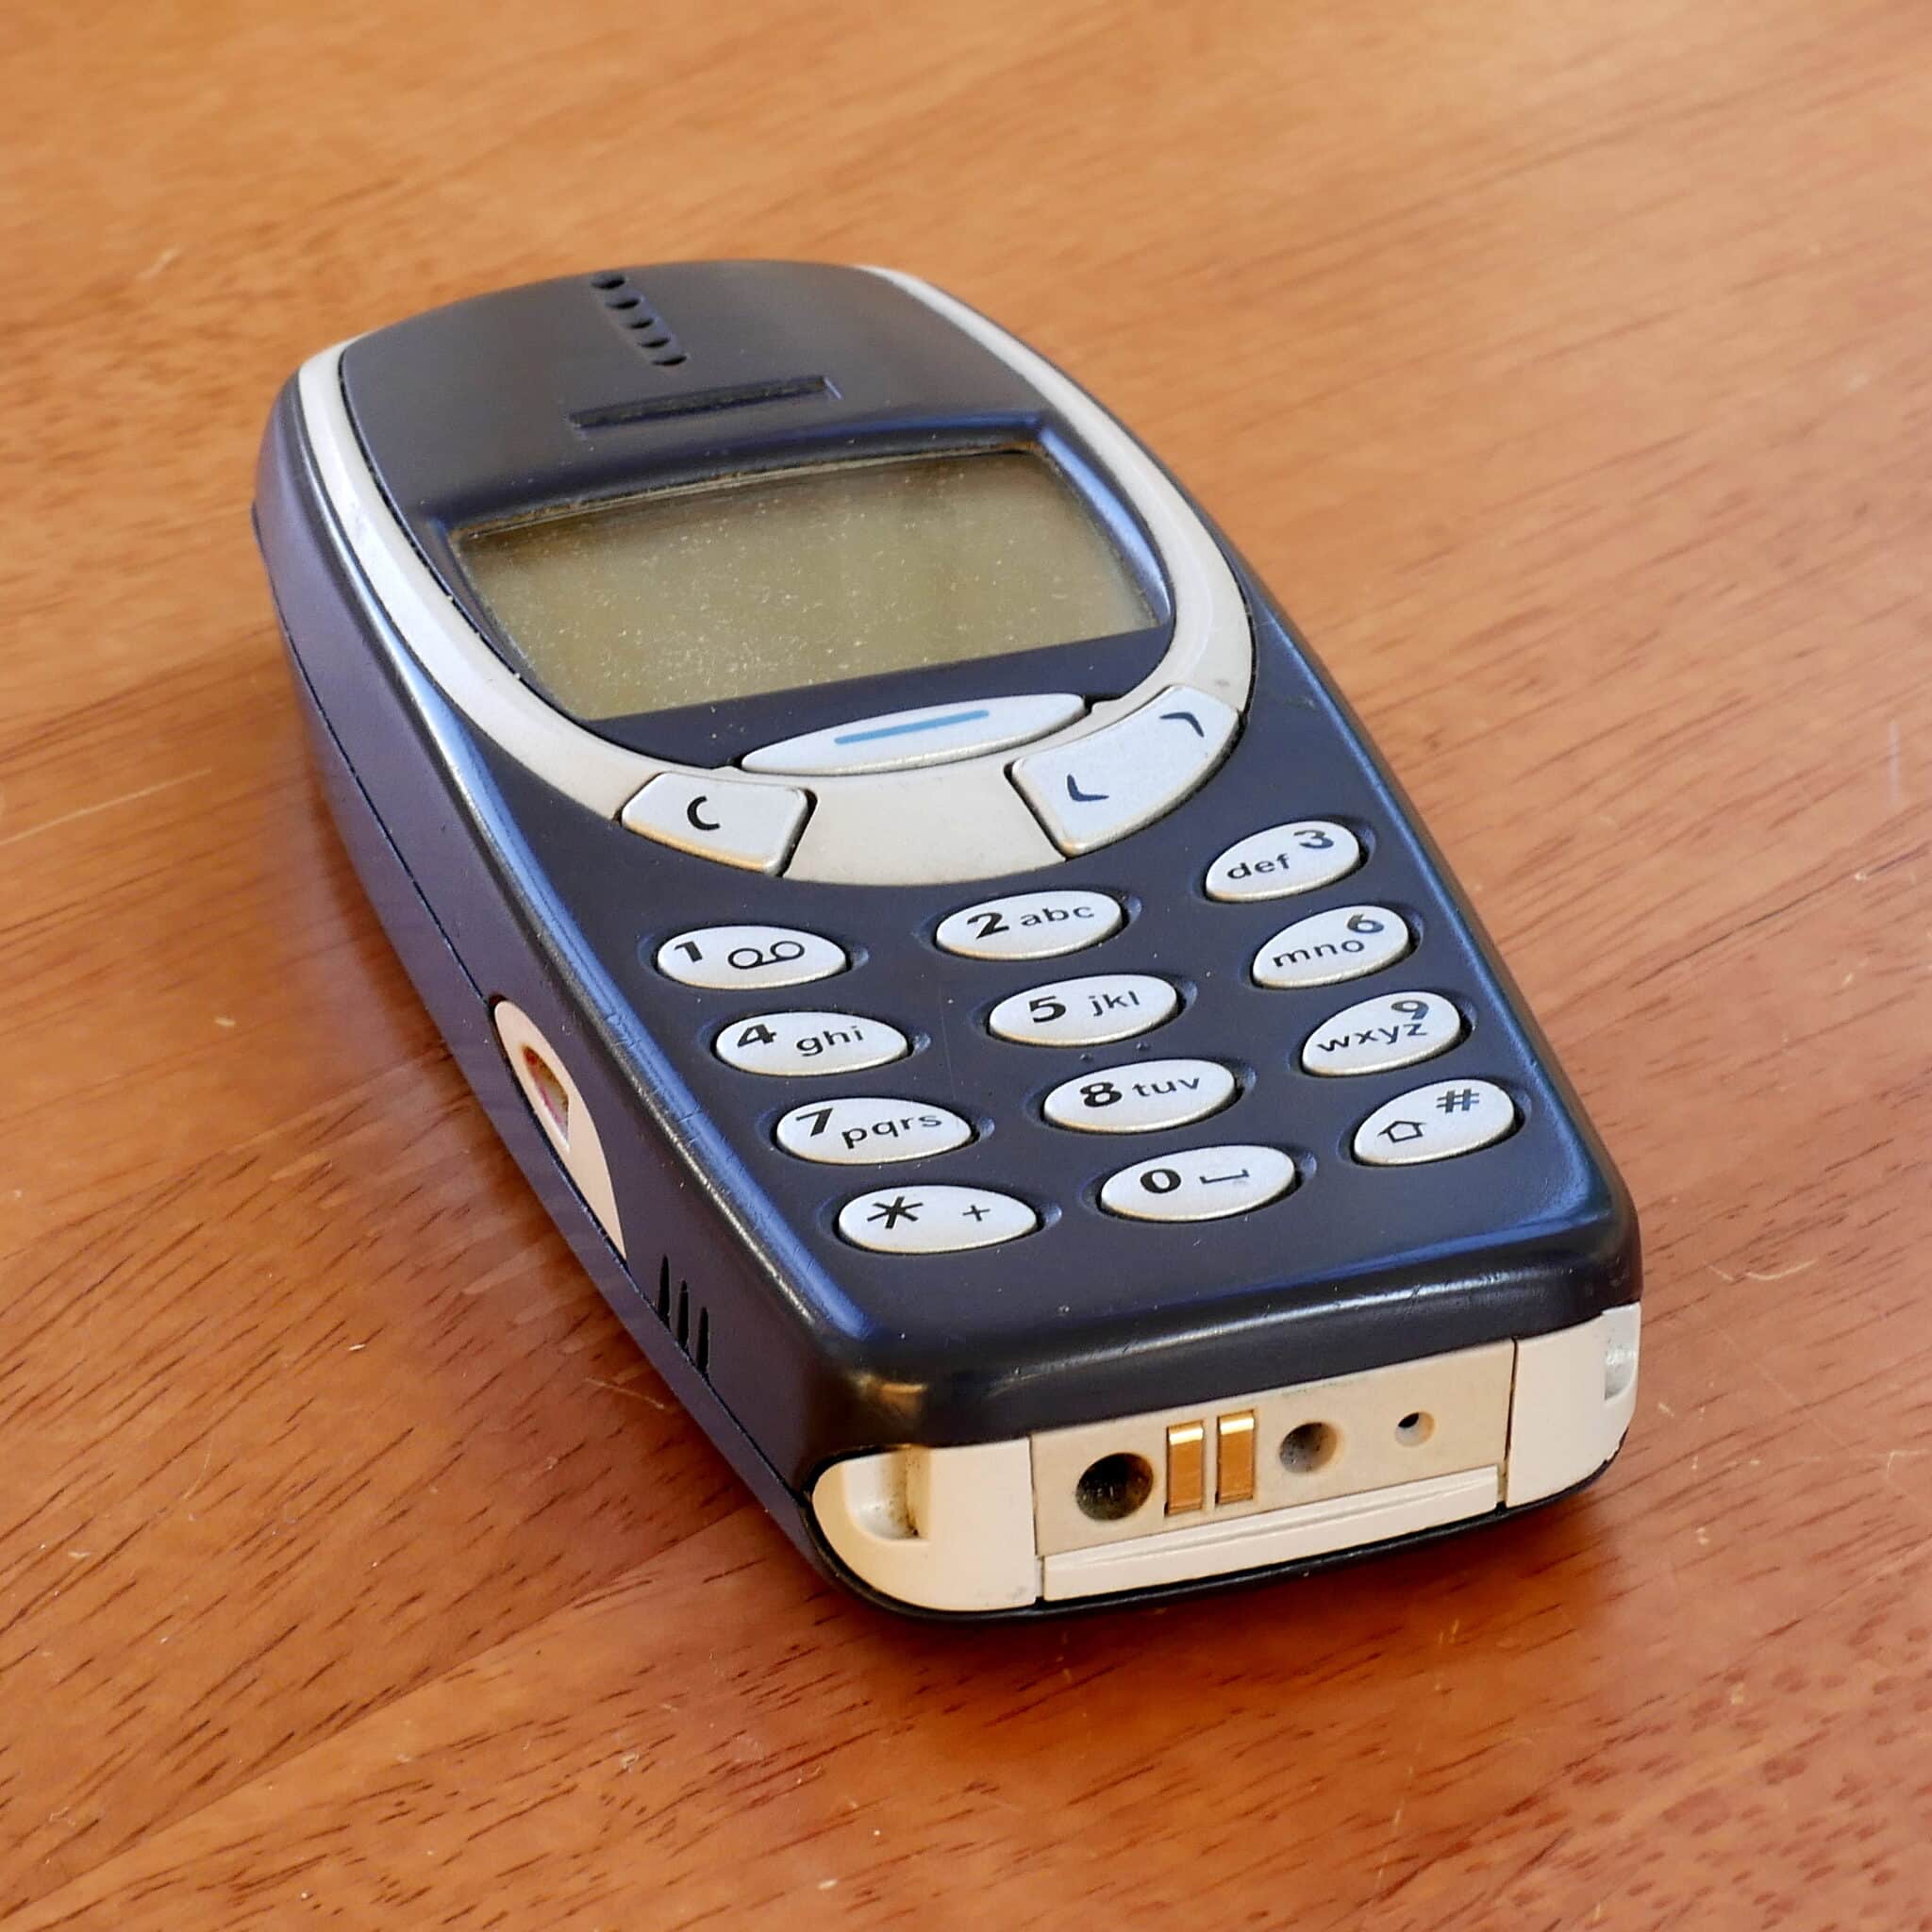 10 most iconic mobile phones of all time - Android Authority